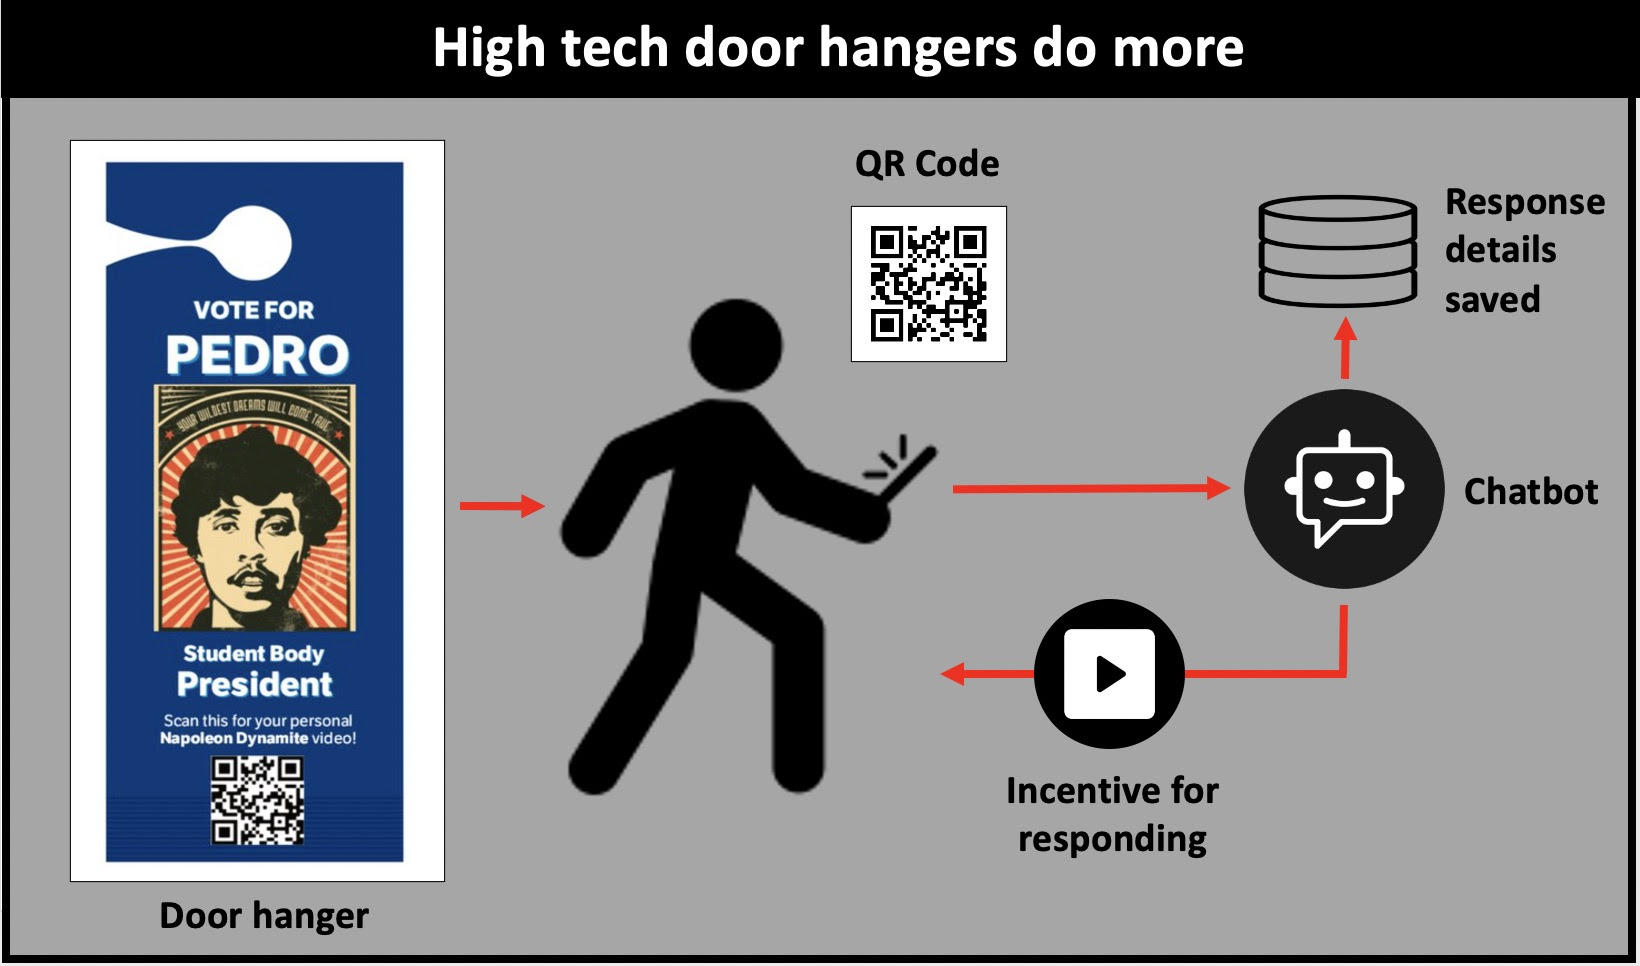 Door hangers enhanced with a QR Code and a chatbot get more responses and collect more details. 